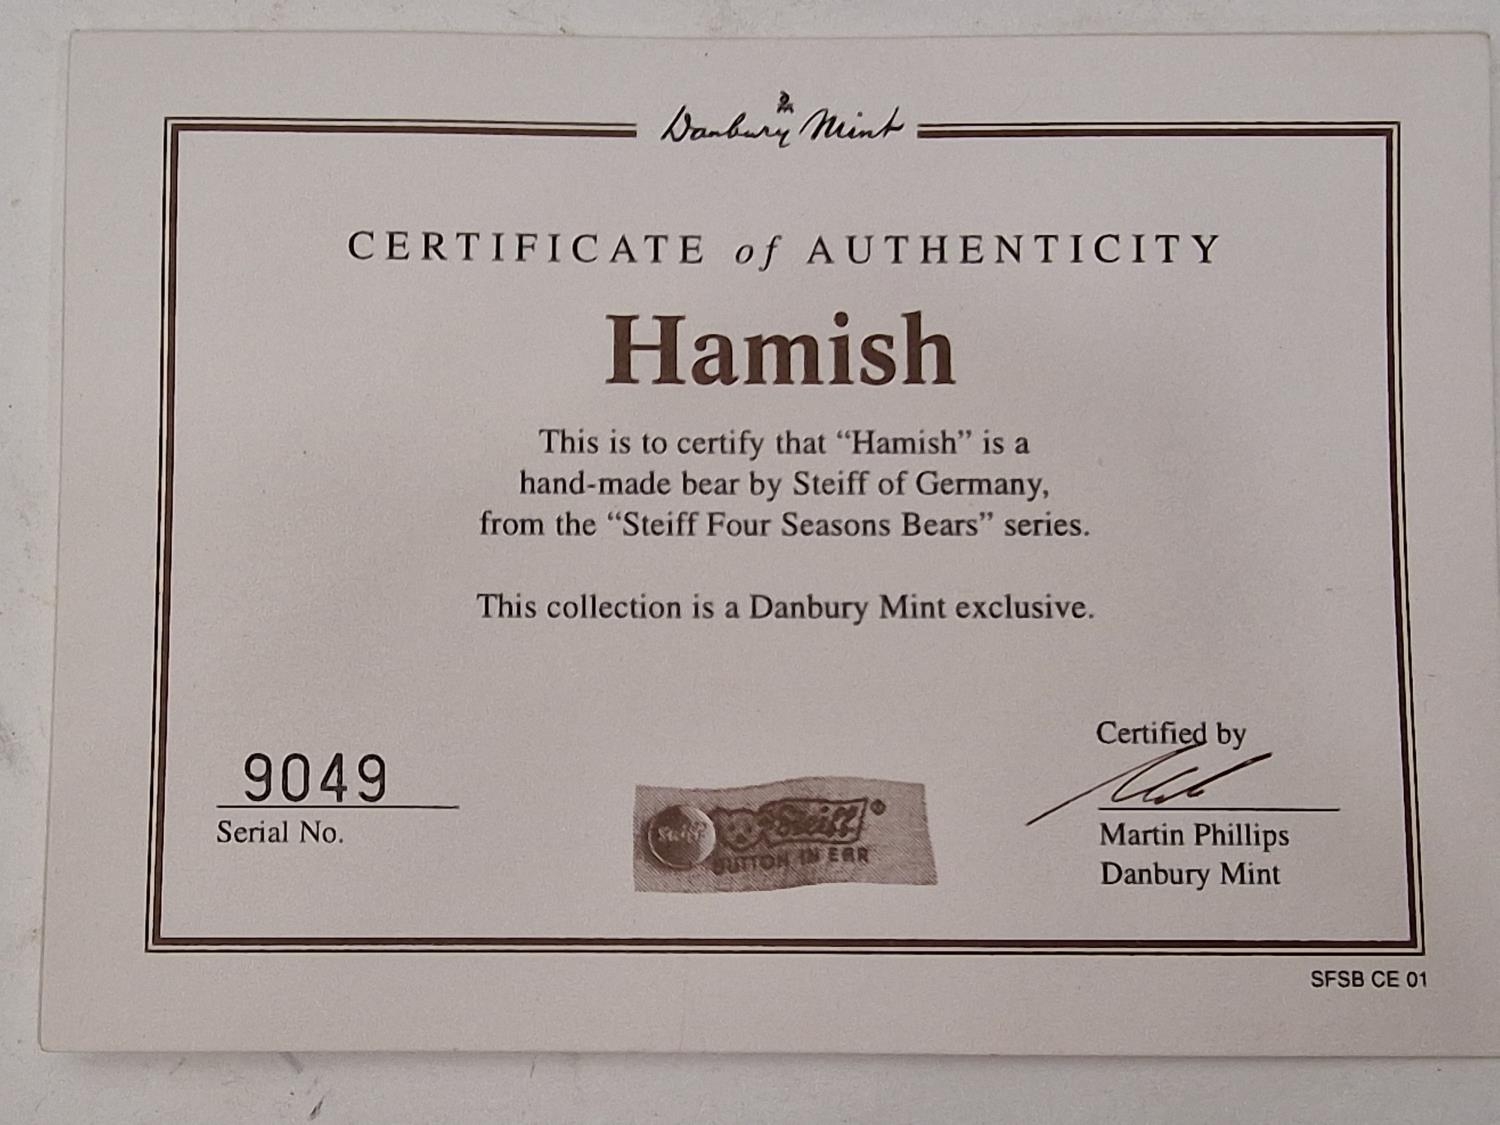 Steiff Danbury Mint "Hamish" collectors teddy bear 34cm complete with certificate in plain cardboard - Image 3 of 3